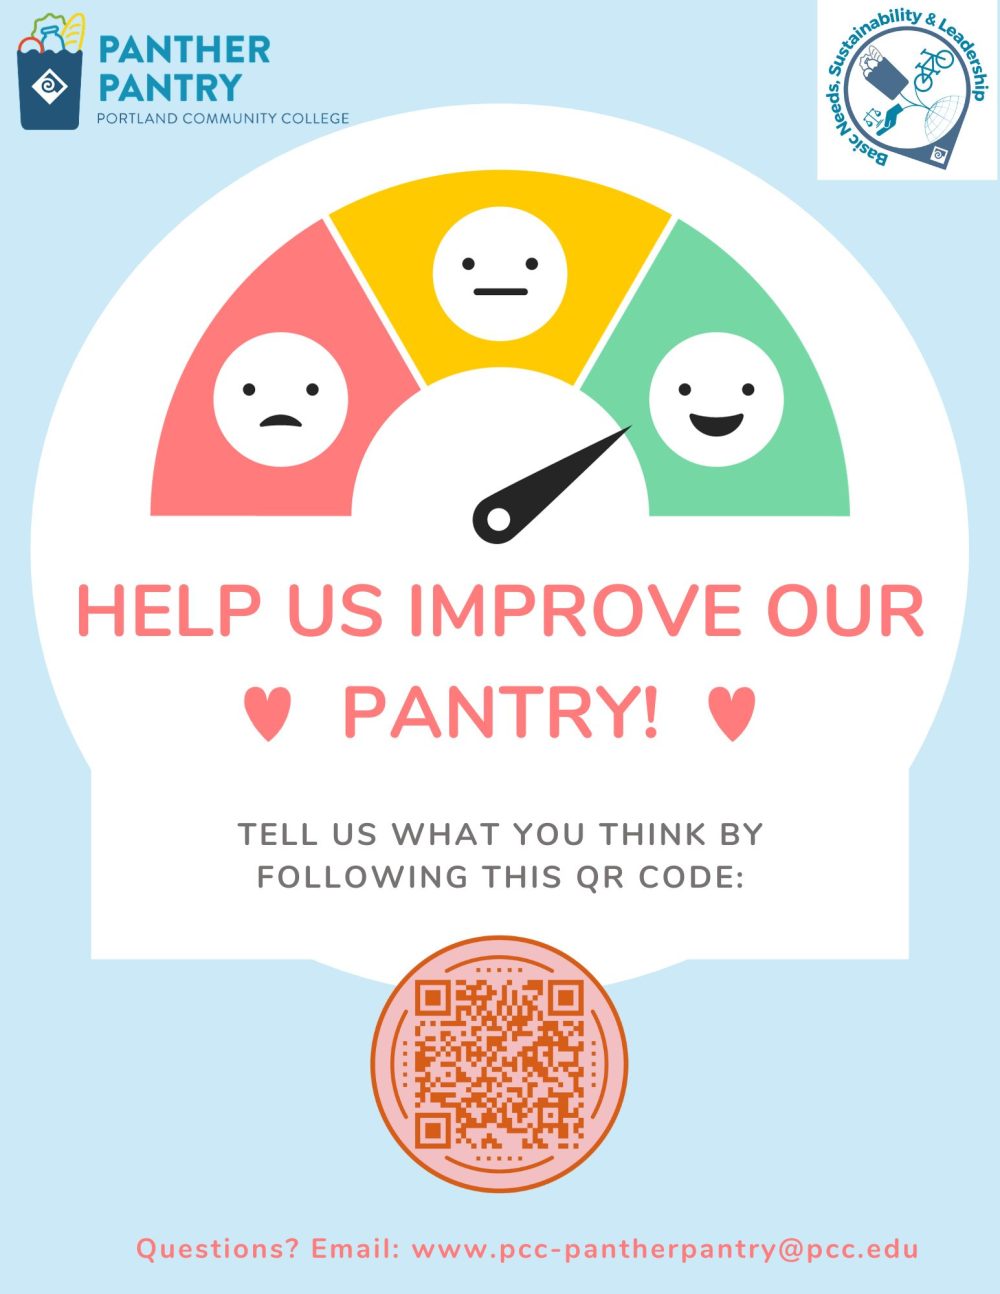 Help us improve our Panther Pantry! Tell us what you think by following this QR code